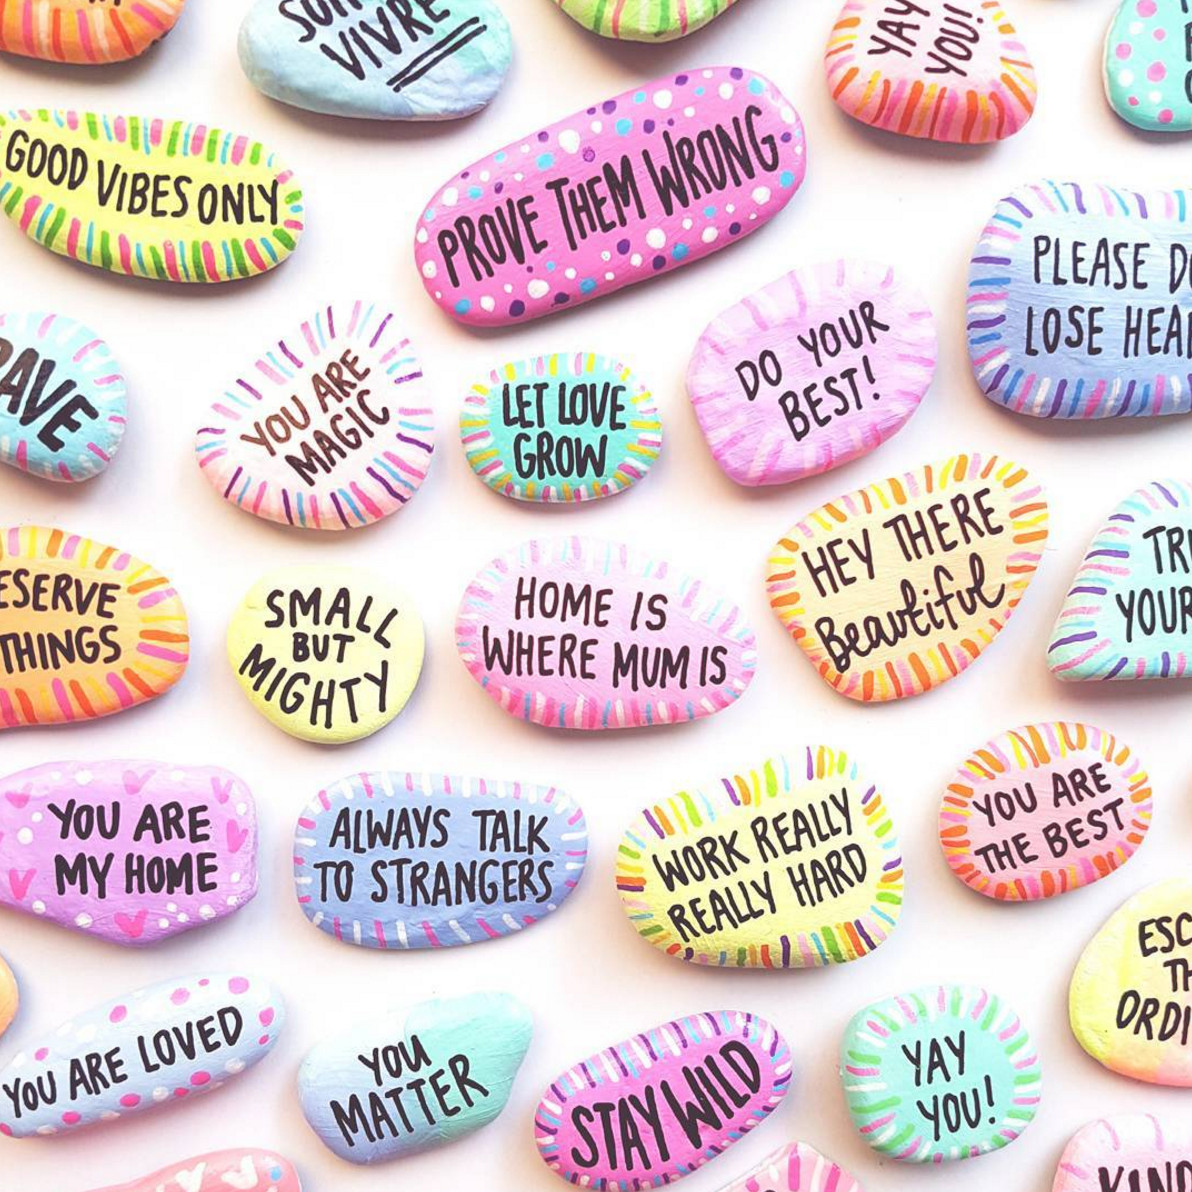 Kindness Rocks Quotes
 Let s Chat Papered Thoughts Rock Art